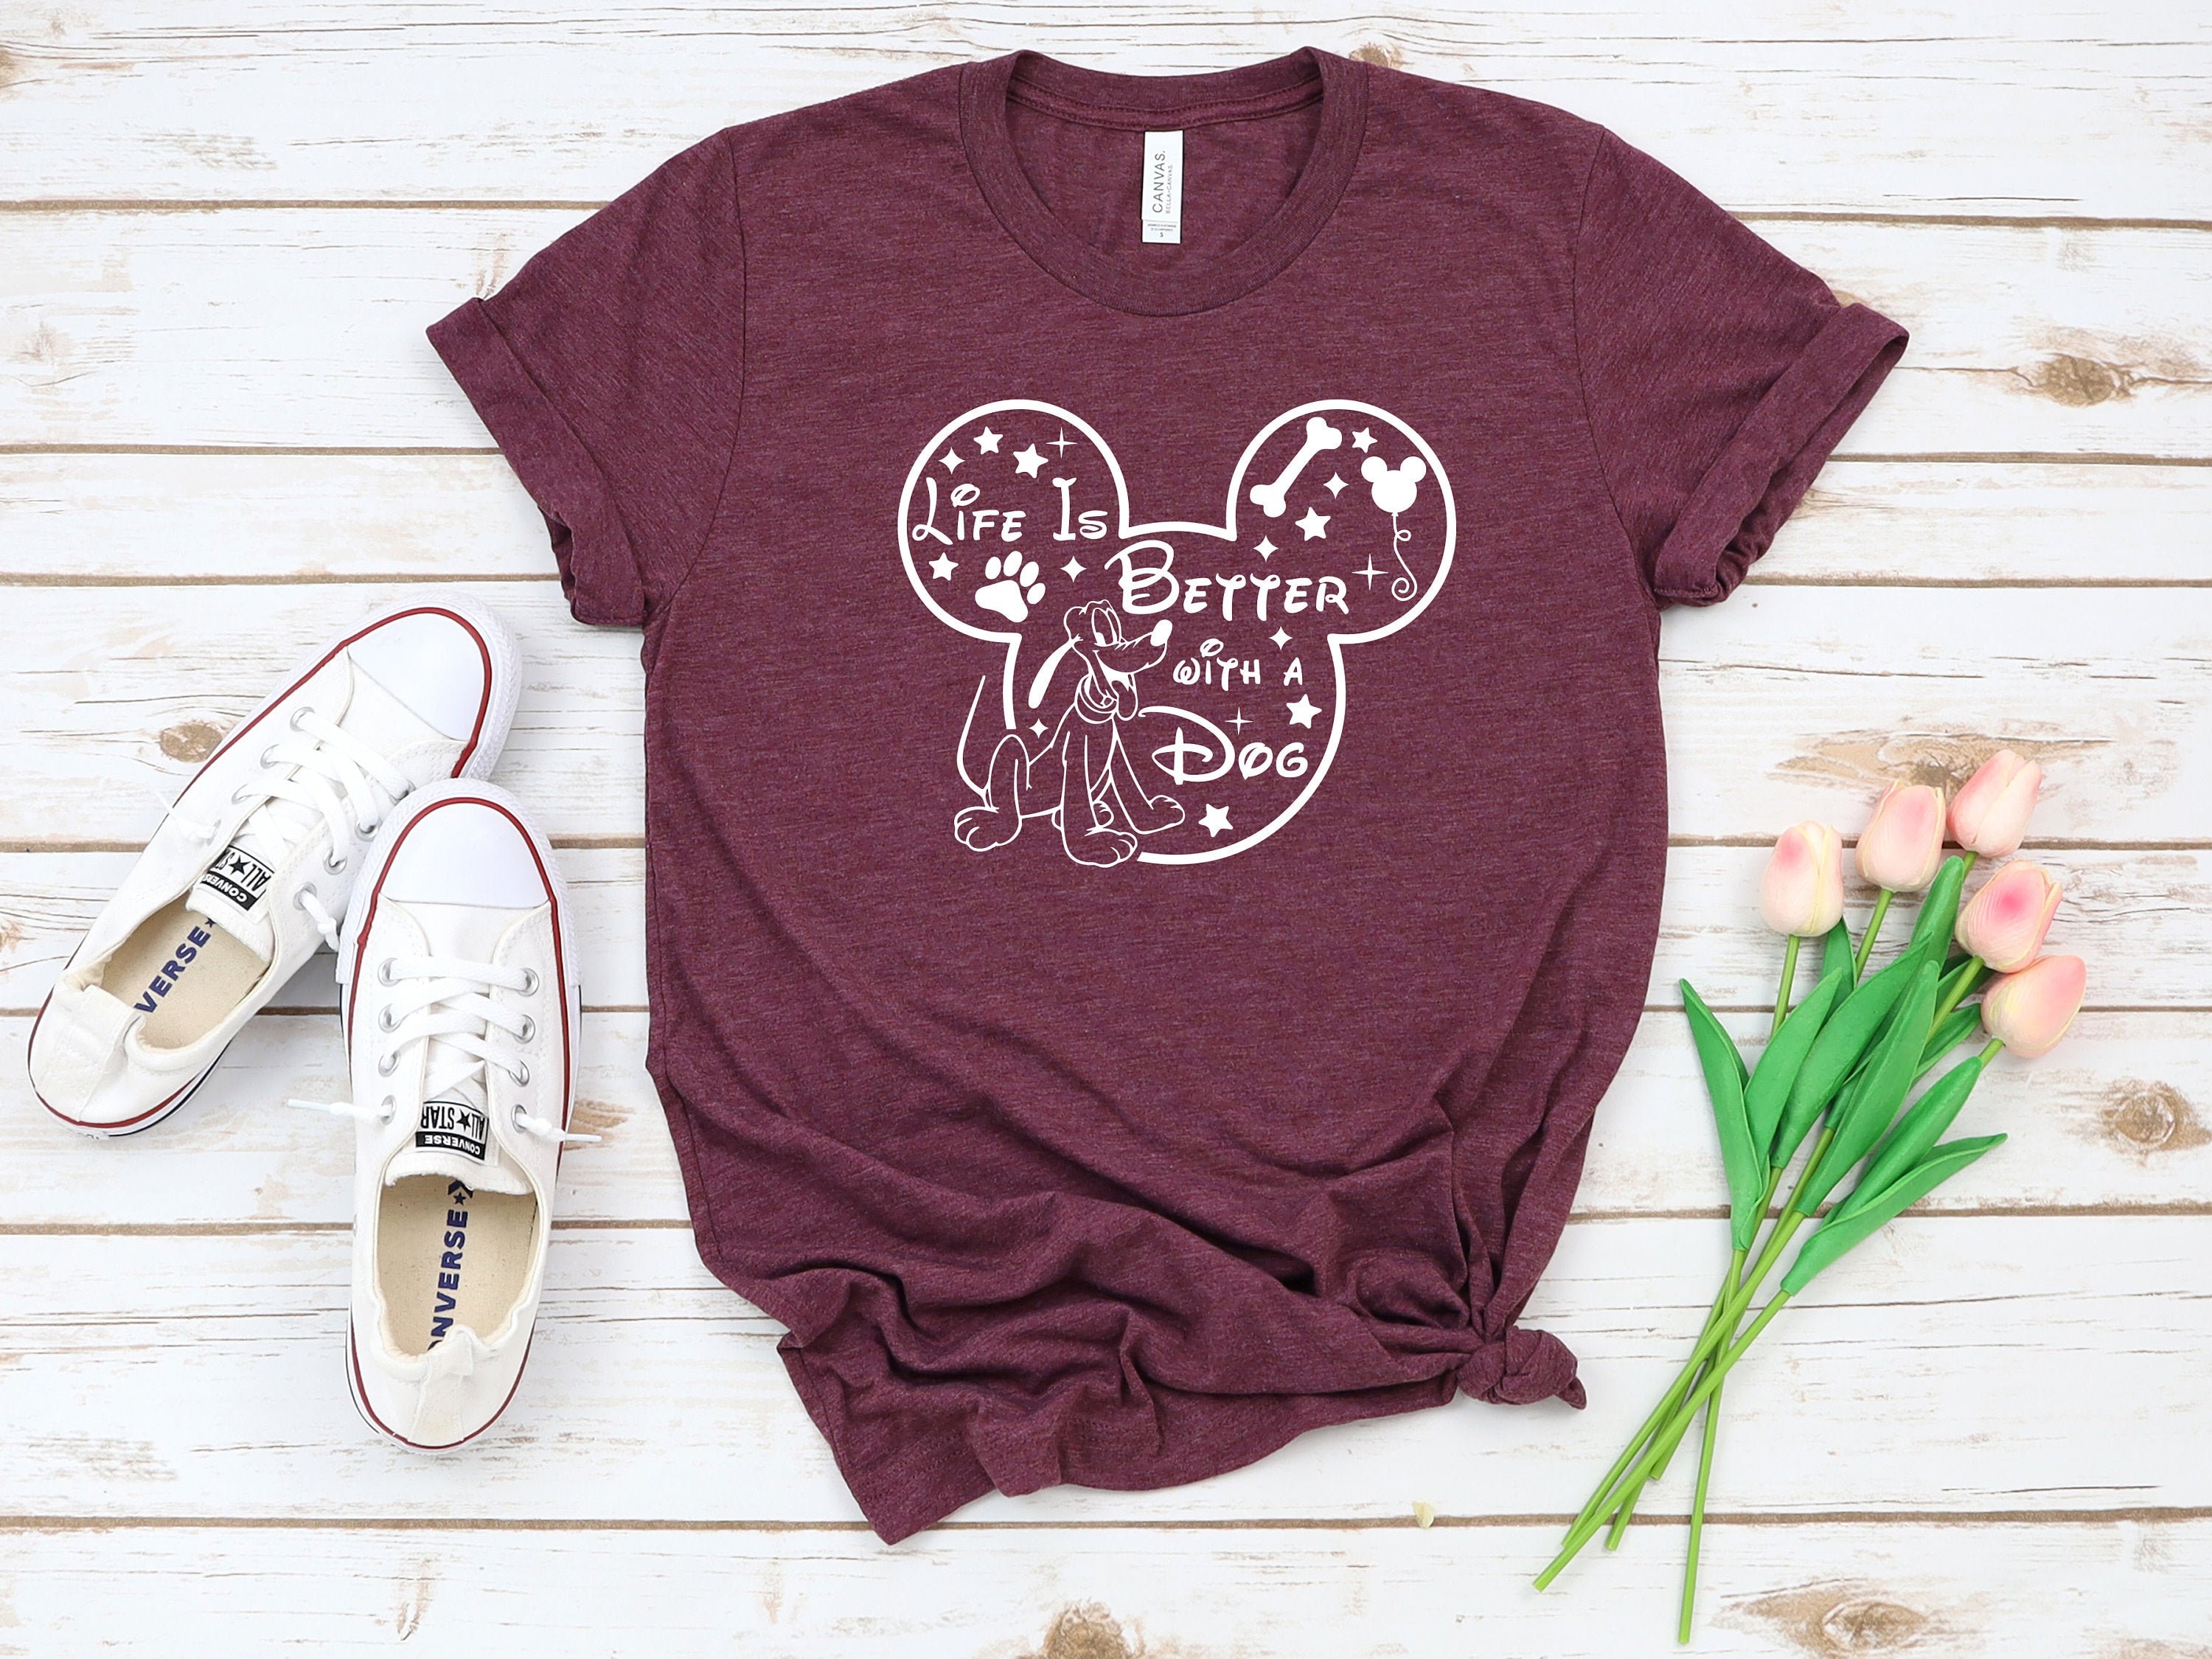 Discover Life is Better with Dogs Disney Shirt, Disney Dog Shirt